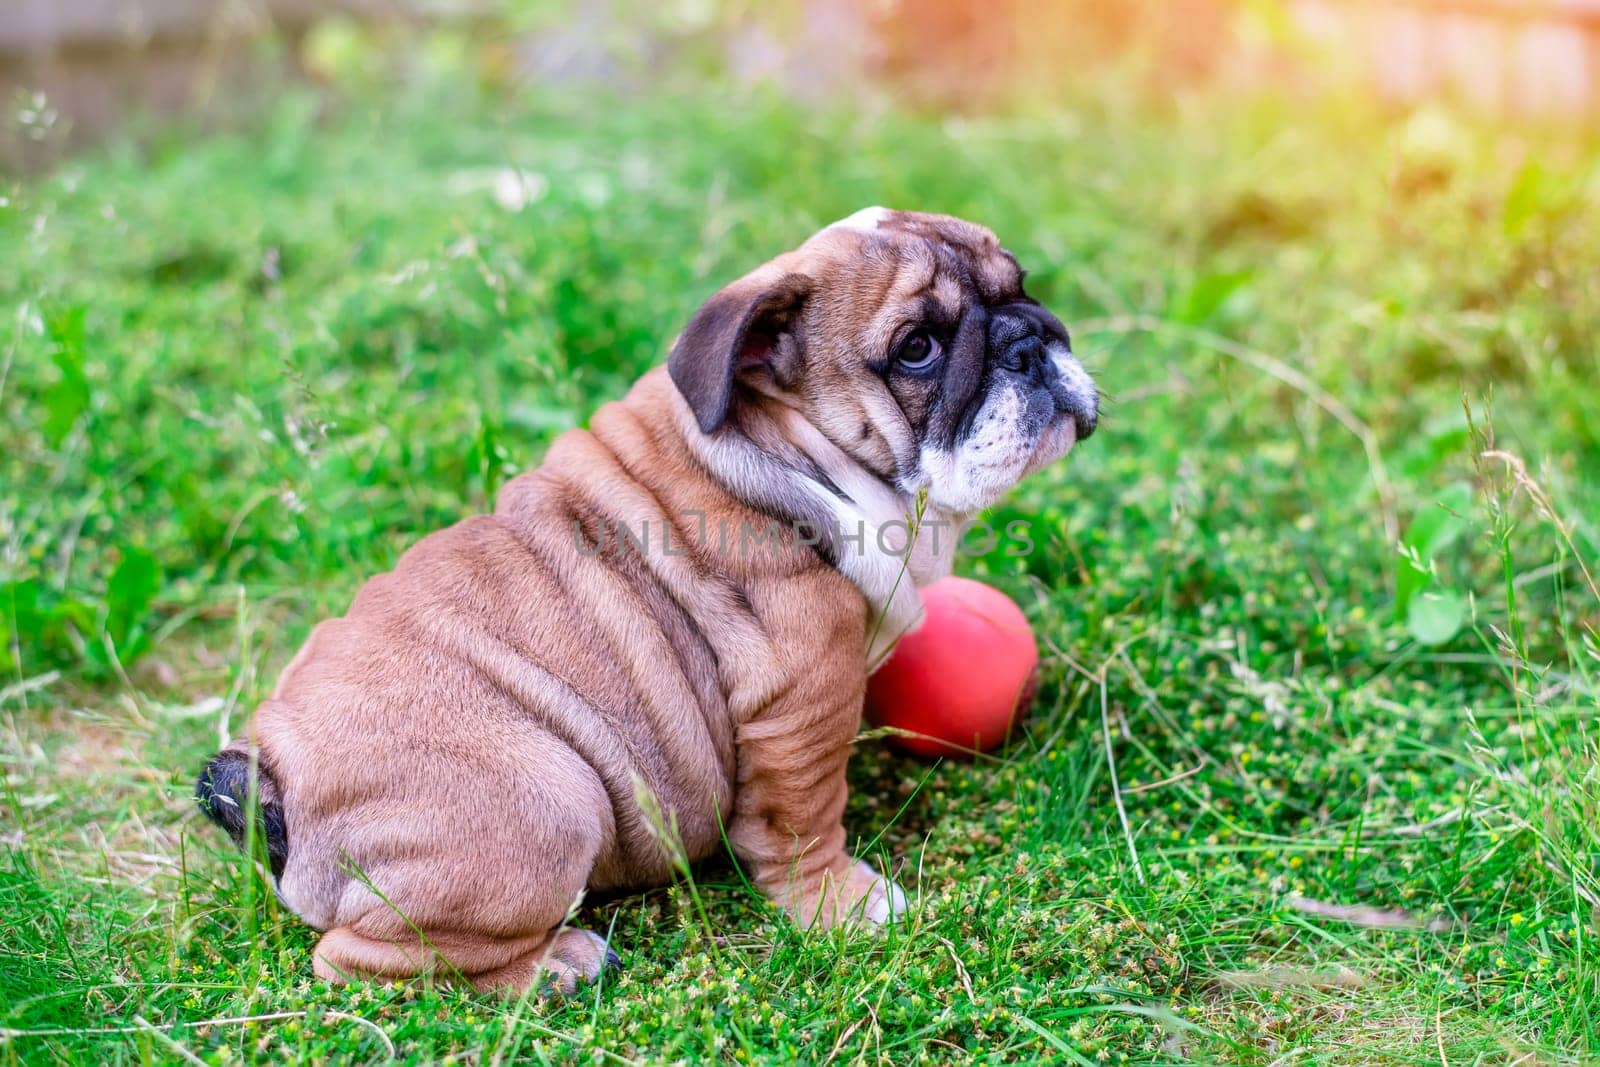 Puppy of Red English Bulldog sitting on  grass in back garden with toy